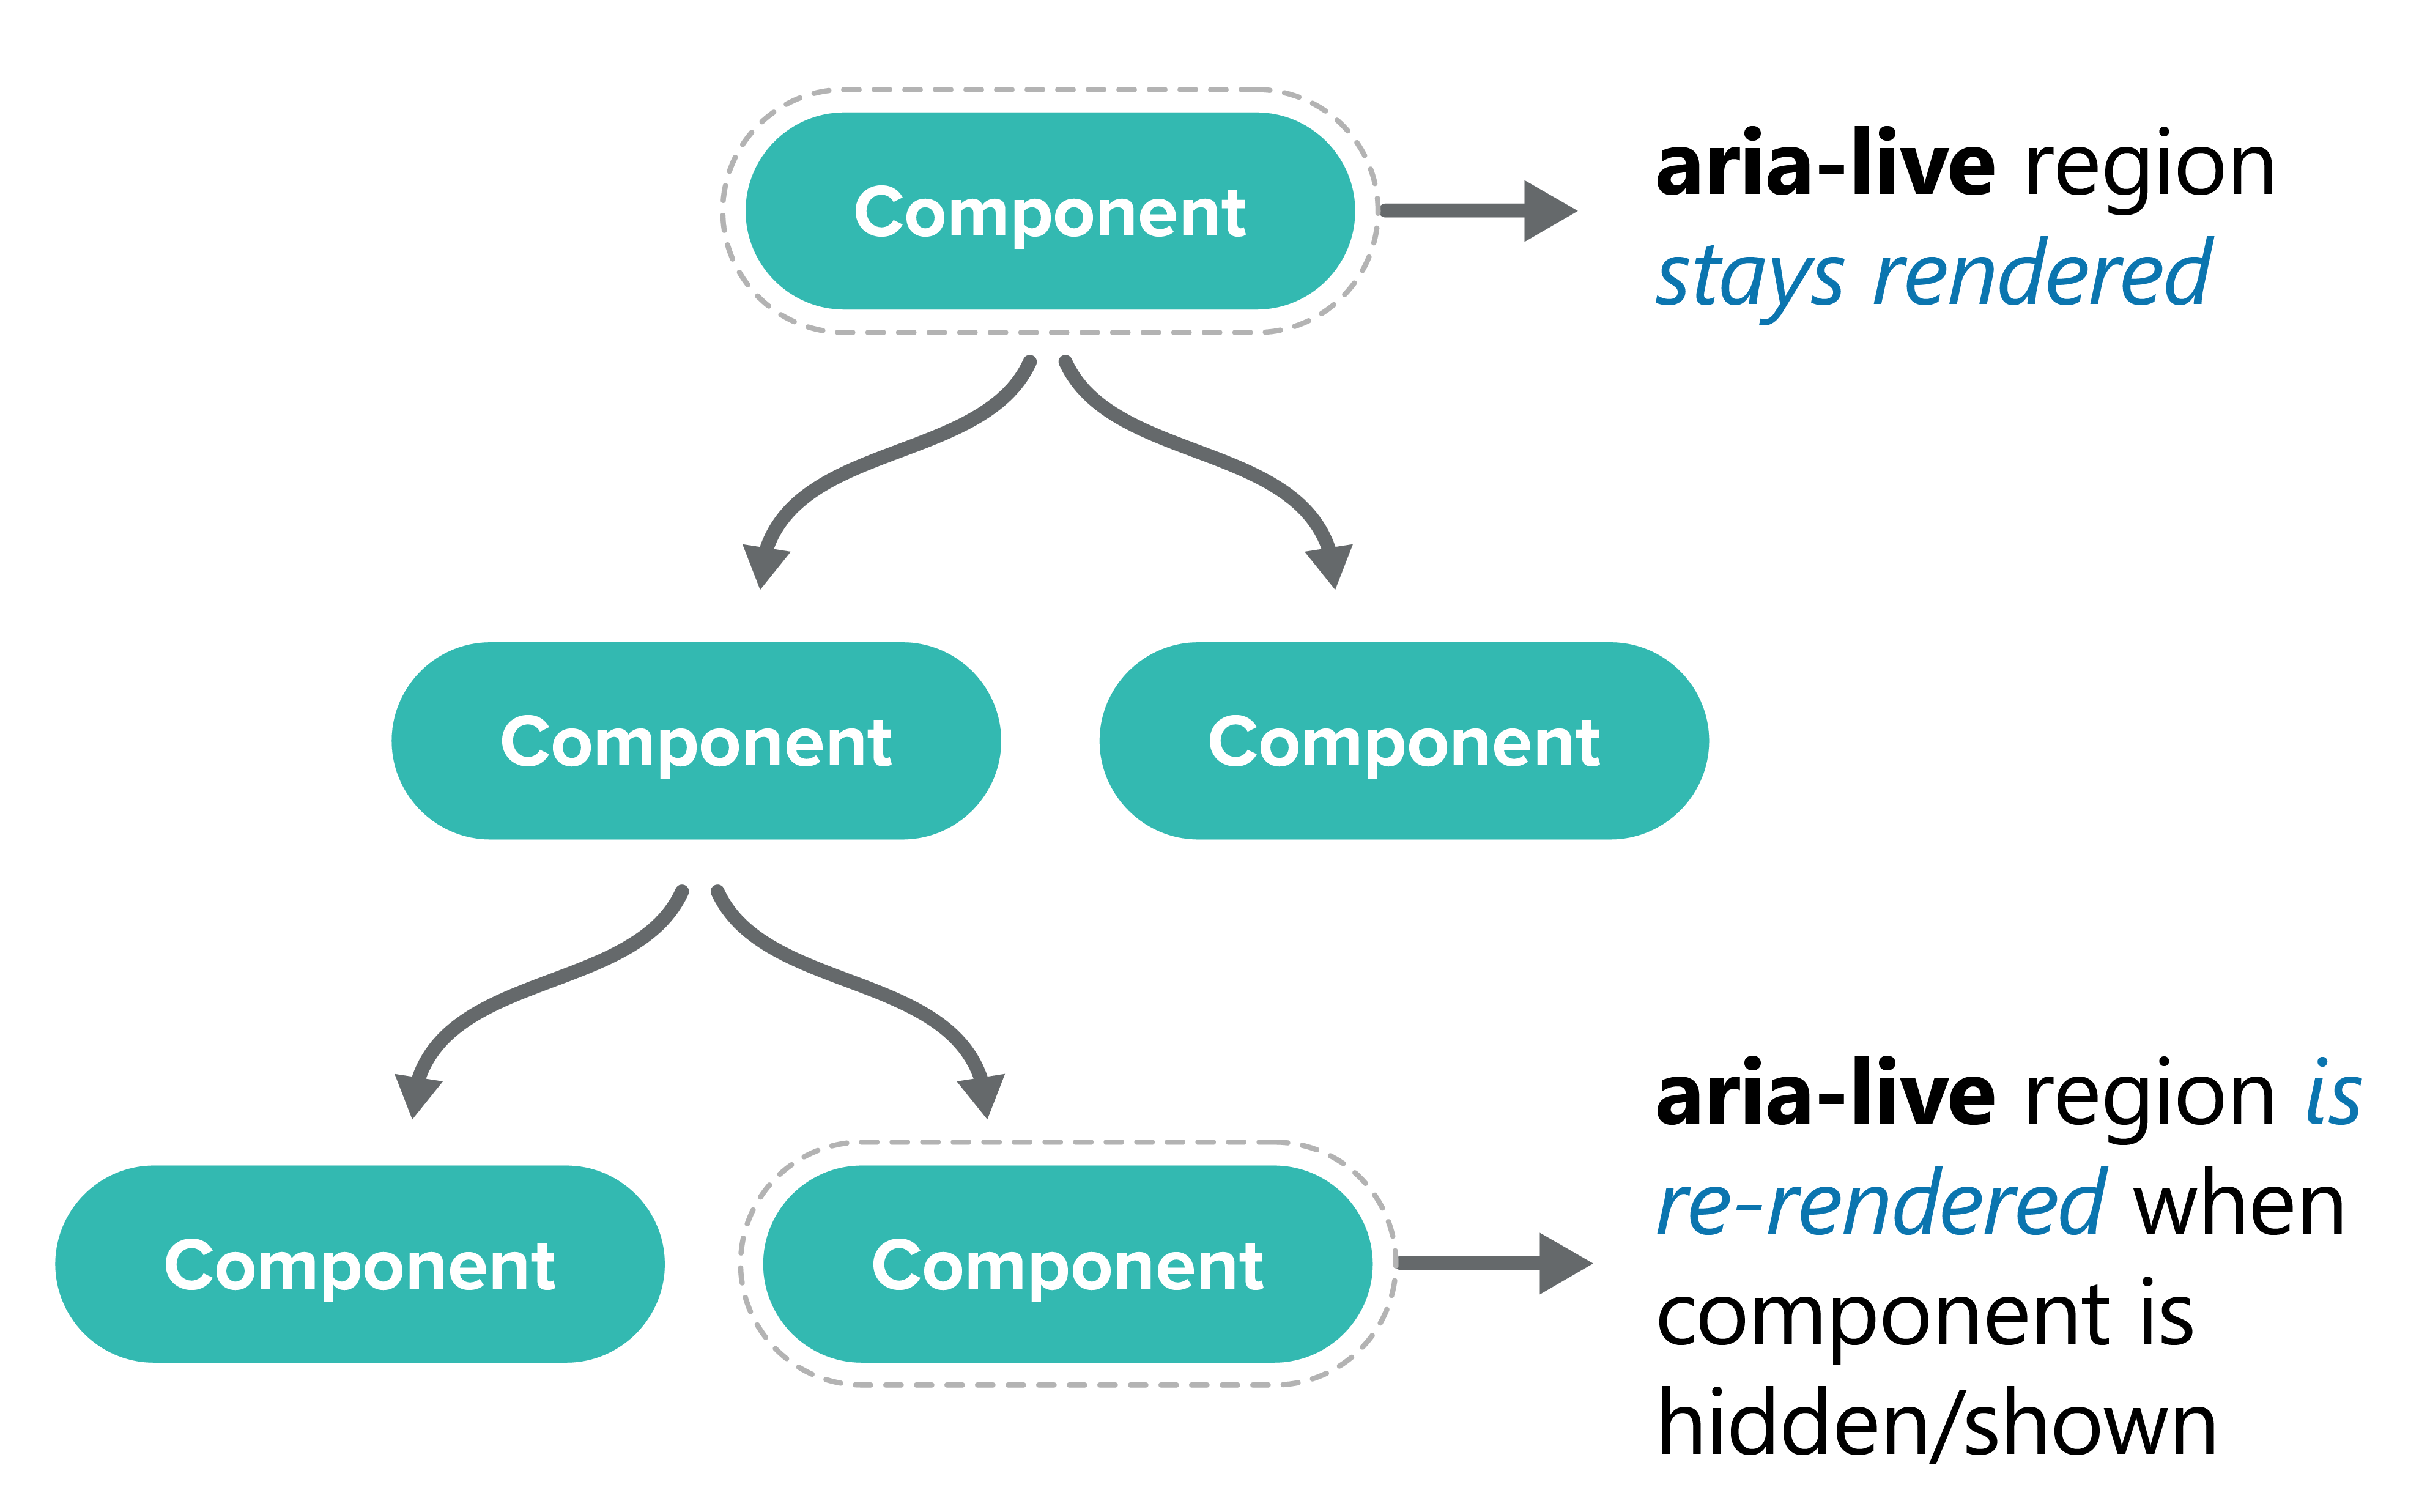 Illustrates that the aria live region is more stable when rendered in the root component.